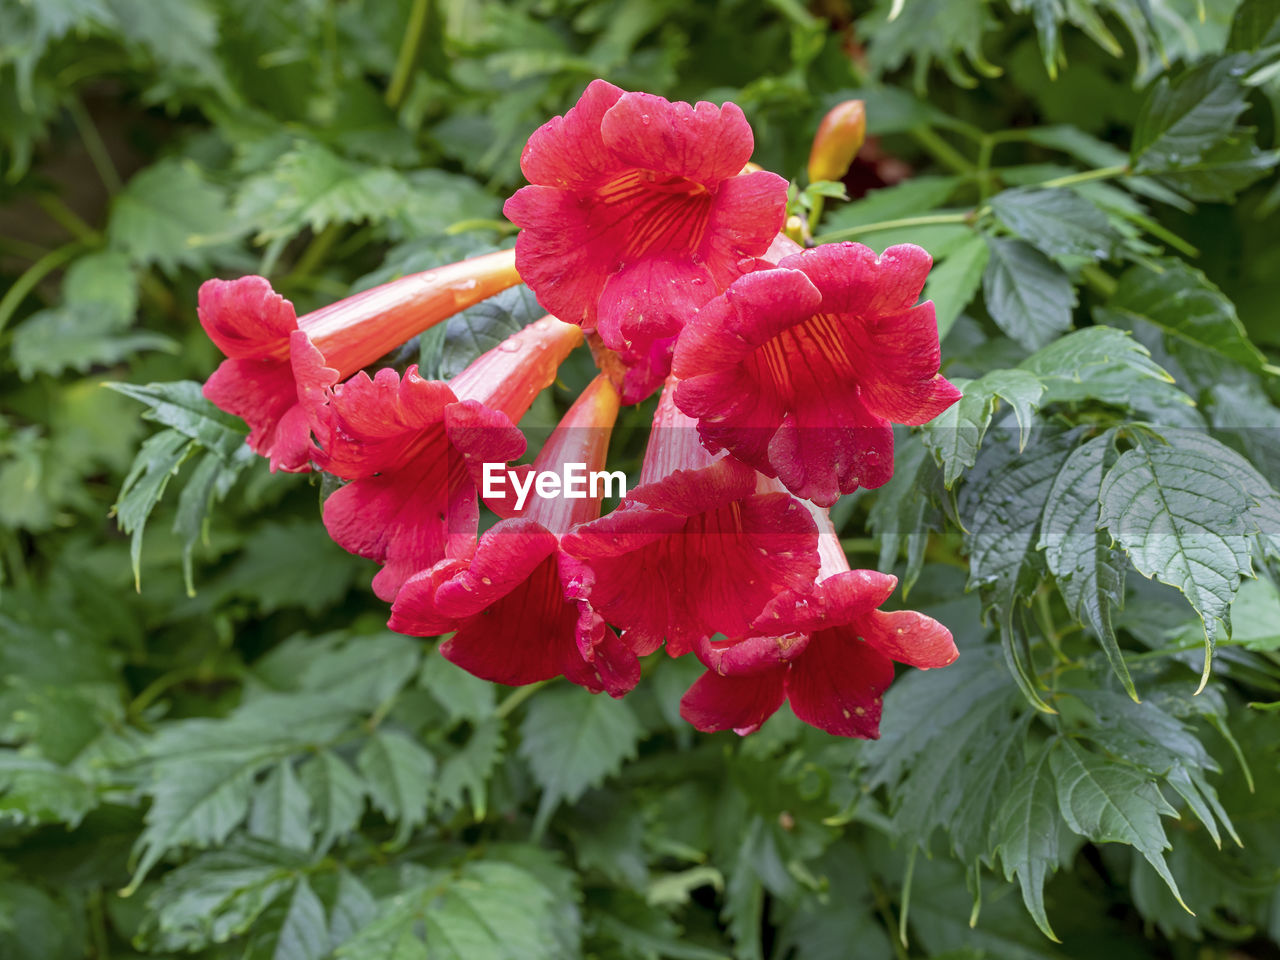 plant, flower, flowering plant, plant part, beauty in nature, leaf, freshness, nature, close-up, growth, petal, inflorescence, pink, flower head, red, fragility, green, no people, hibiscus, outdoors, botany, day, springtime, blossom